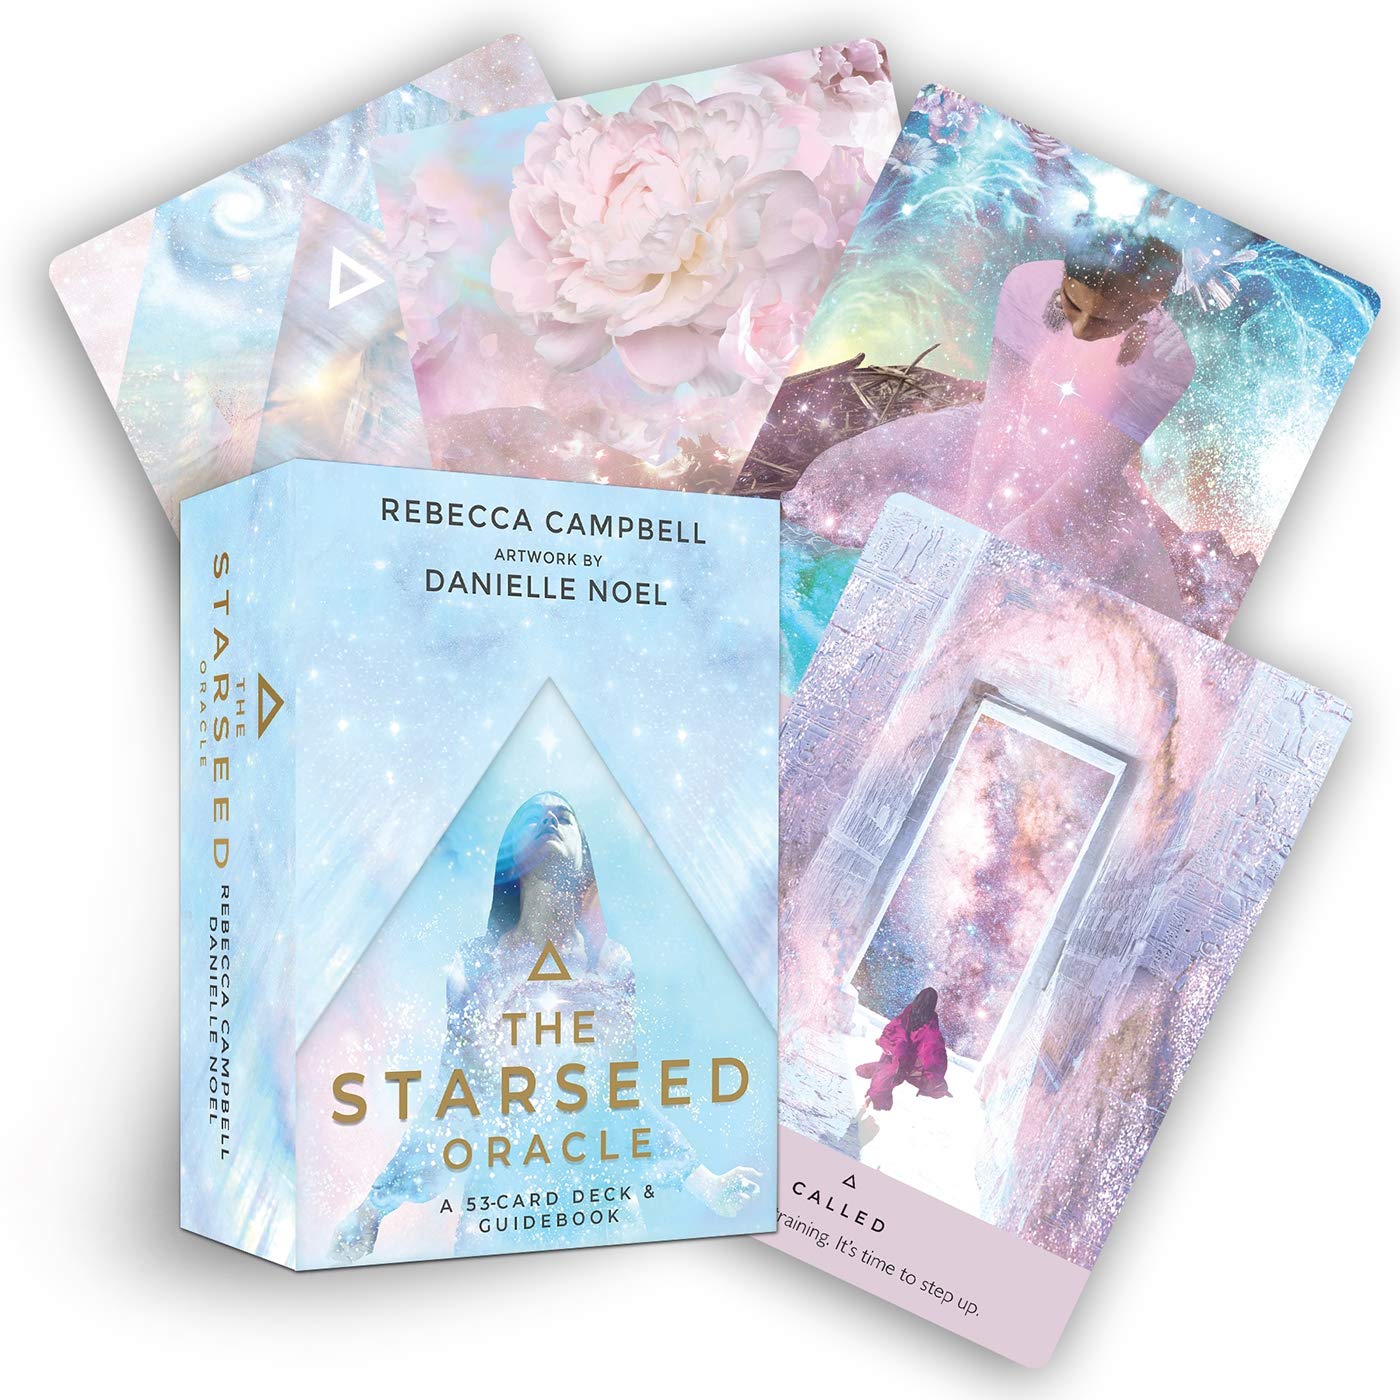 The Starseed Oracle; Rebecca Campbell, artwork by Danielle Noel